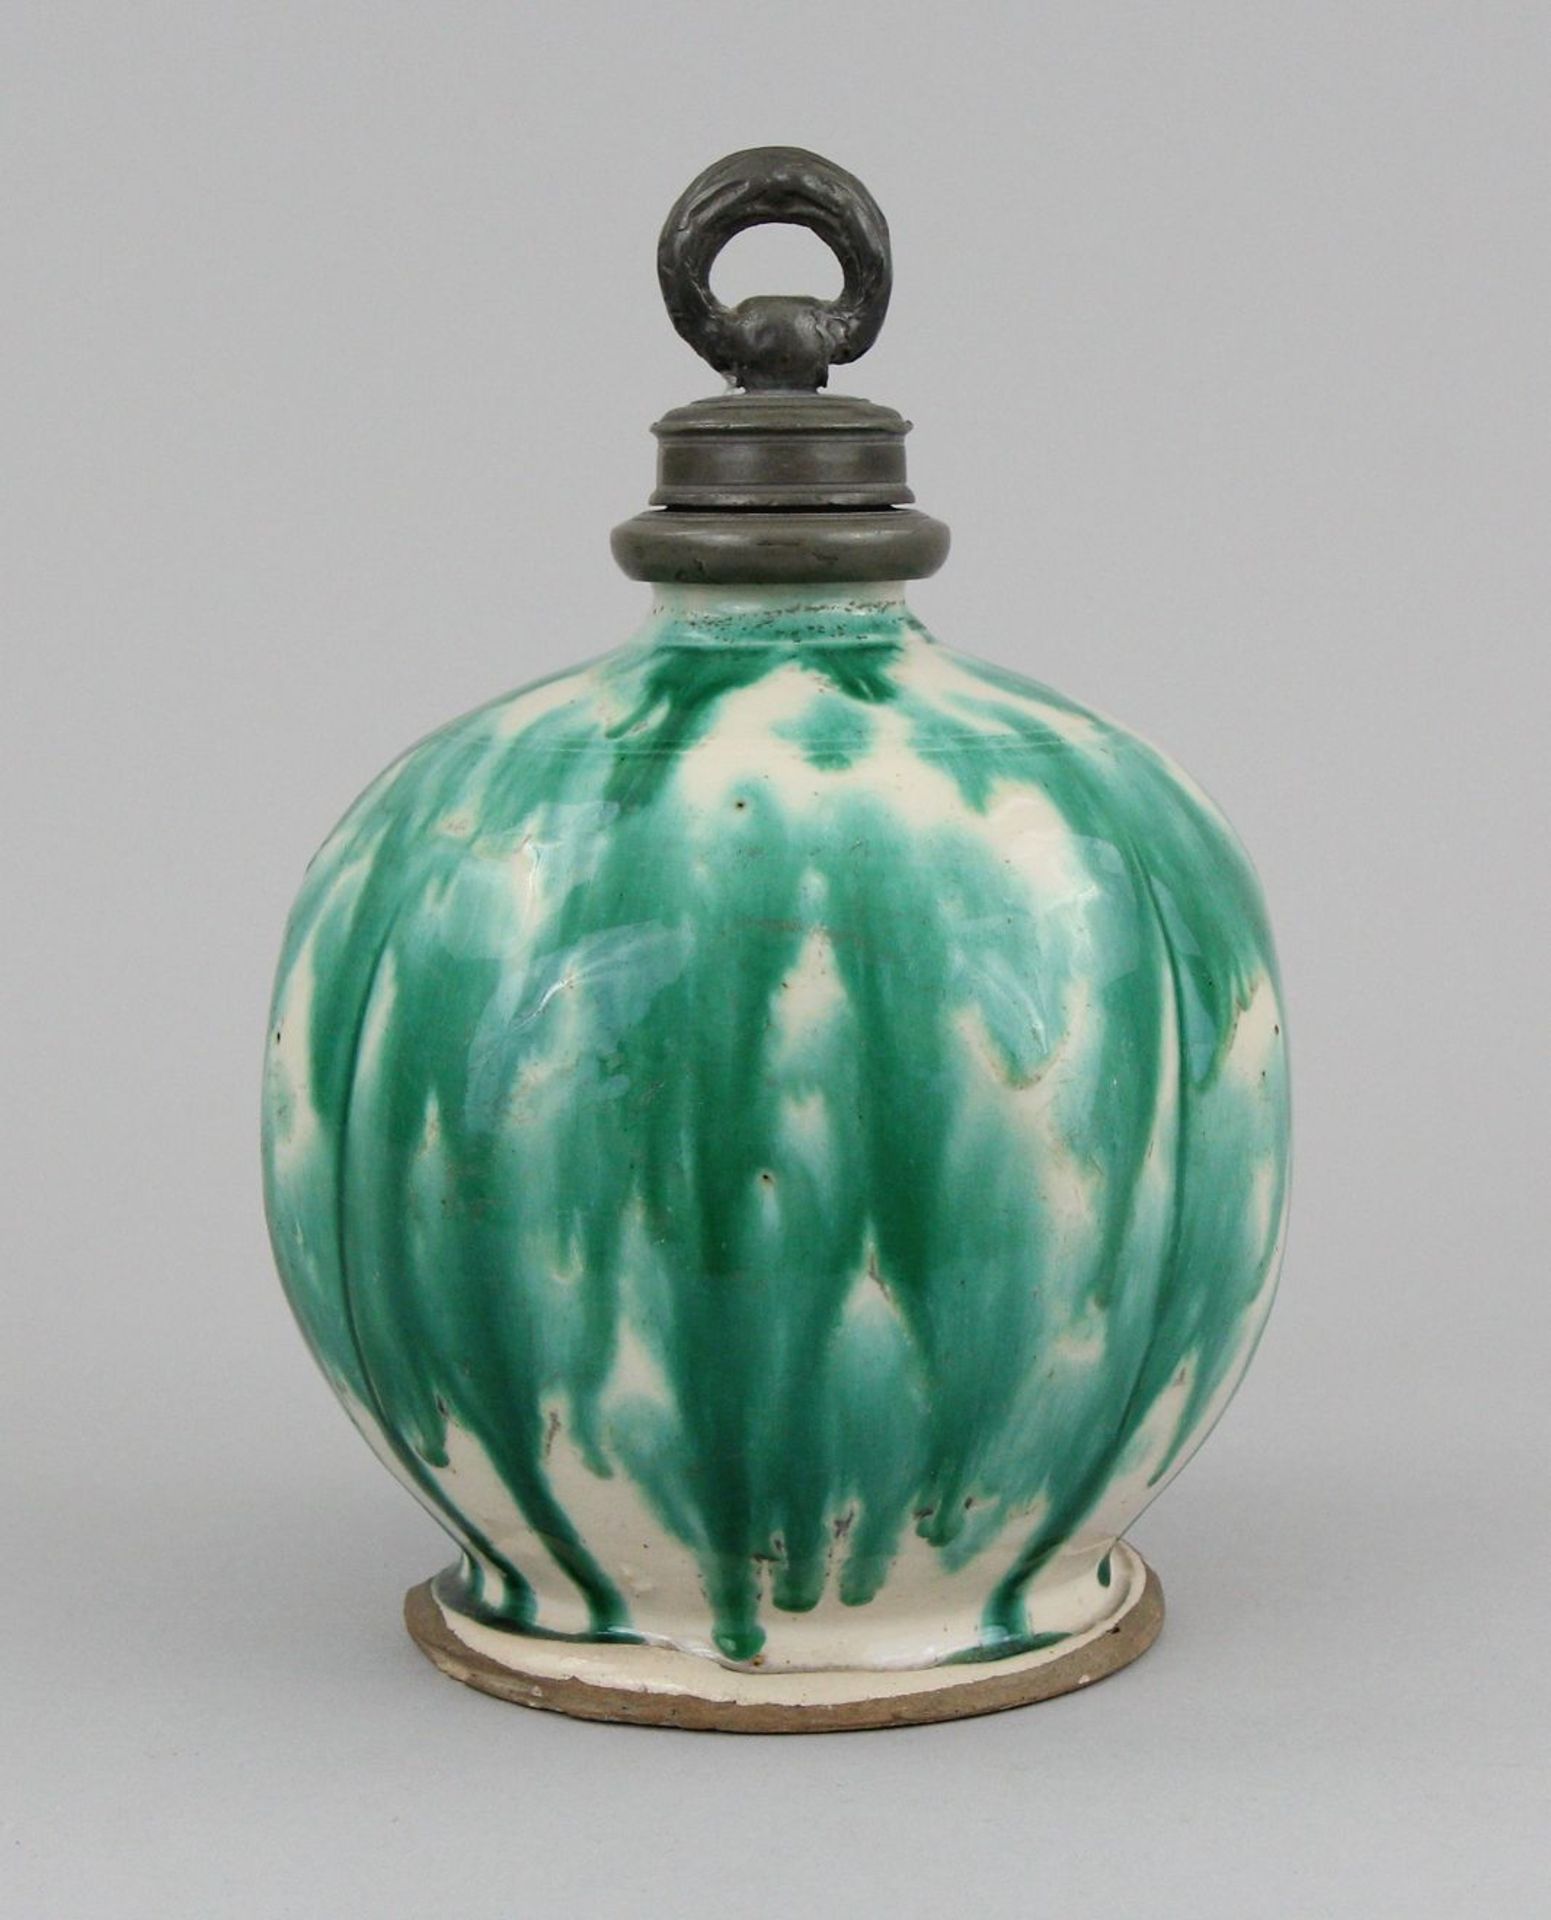 Bottle Green coloured faience, pewter mounting, h. 20.5 cm, Gmunden Austria c.1800, chip to the